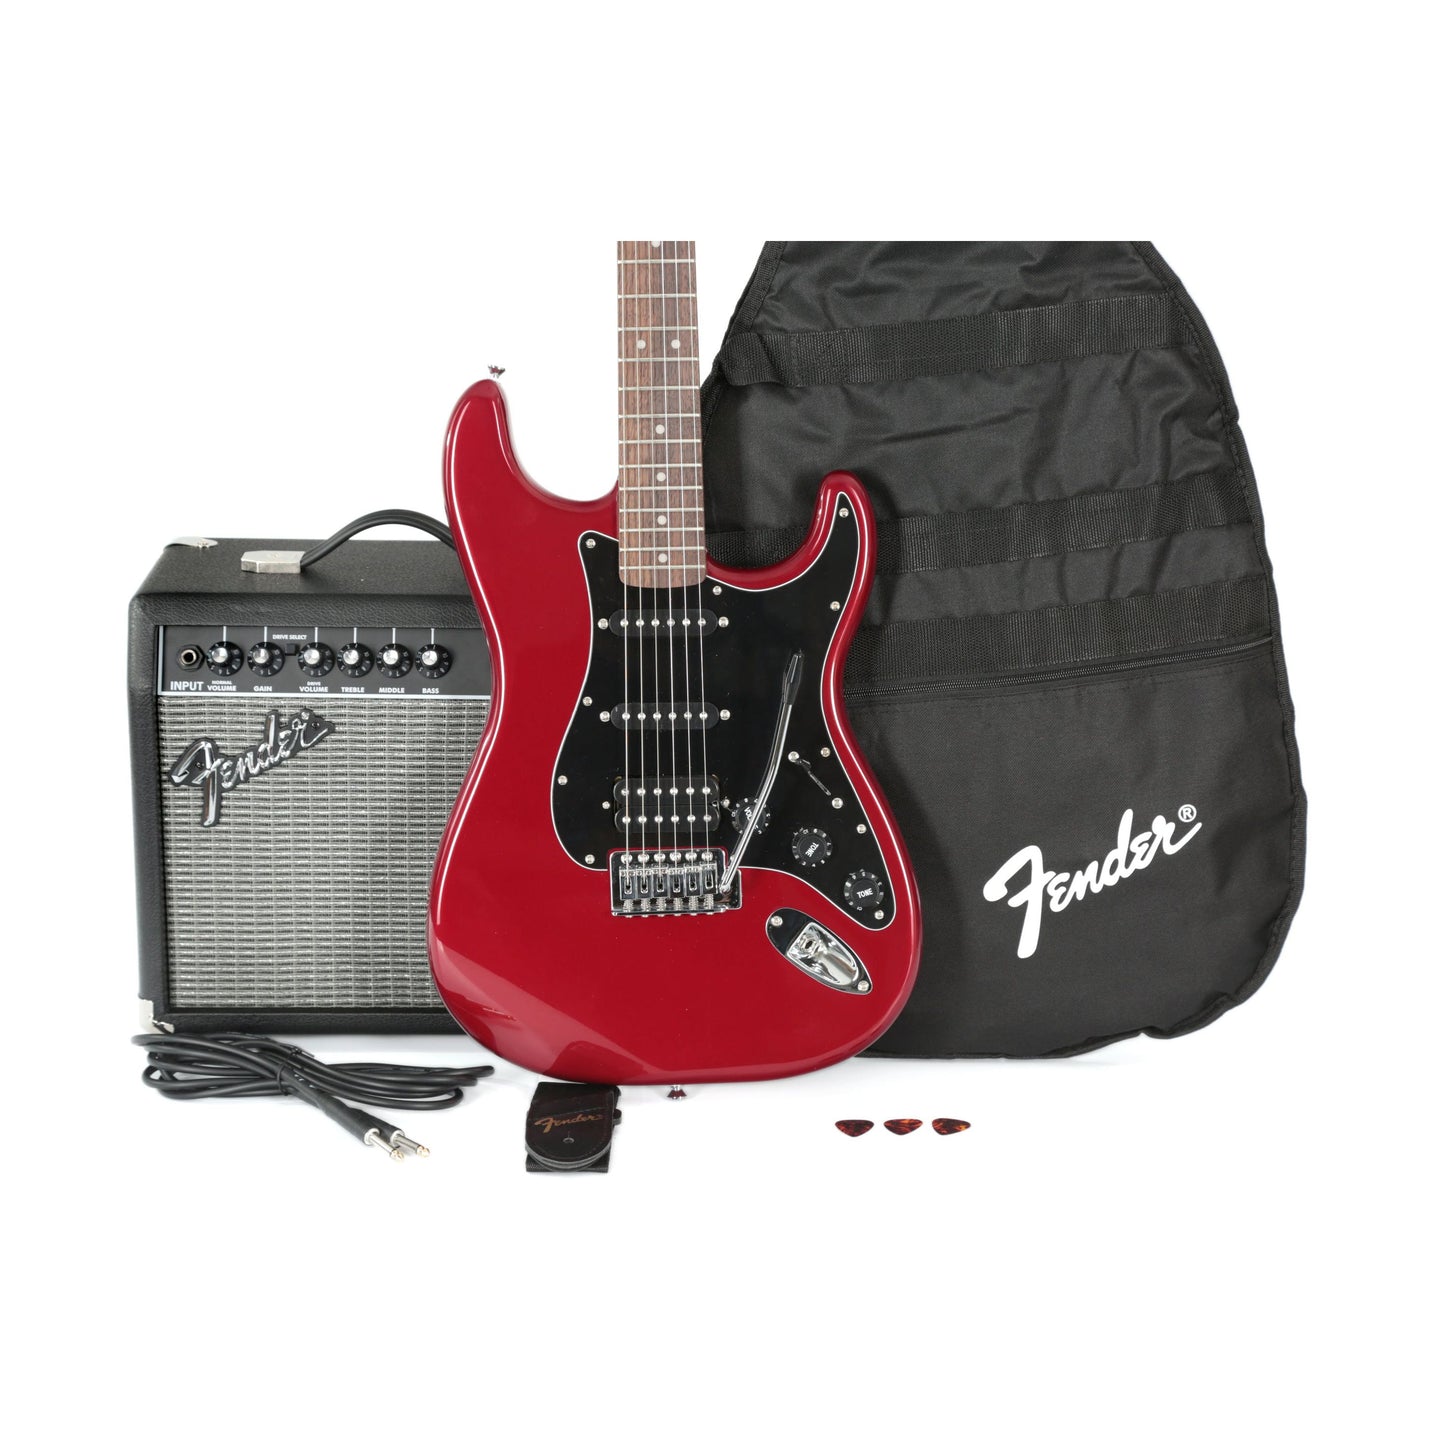 Squier Electric Guitar Affinity Strat HSS Pack in Candy Apple Red with Amplifier (AF PK STRAT HSS GB CAR)